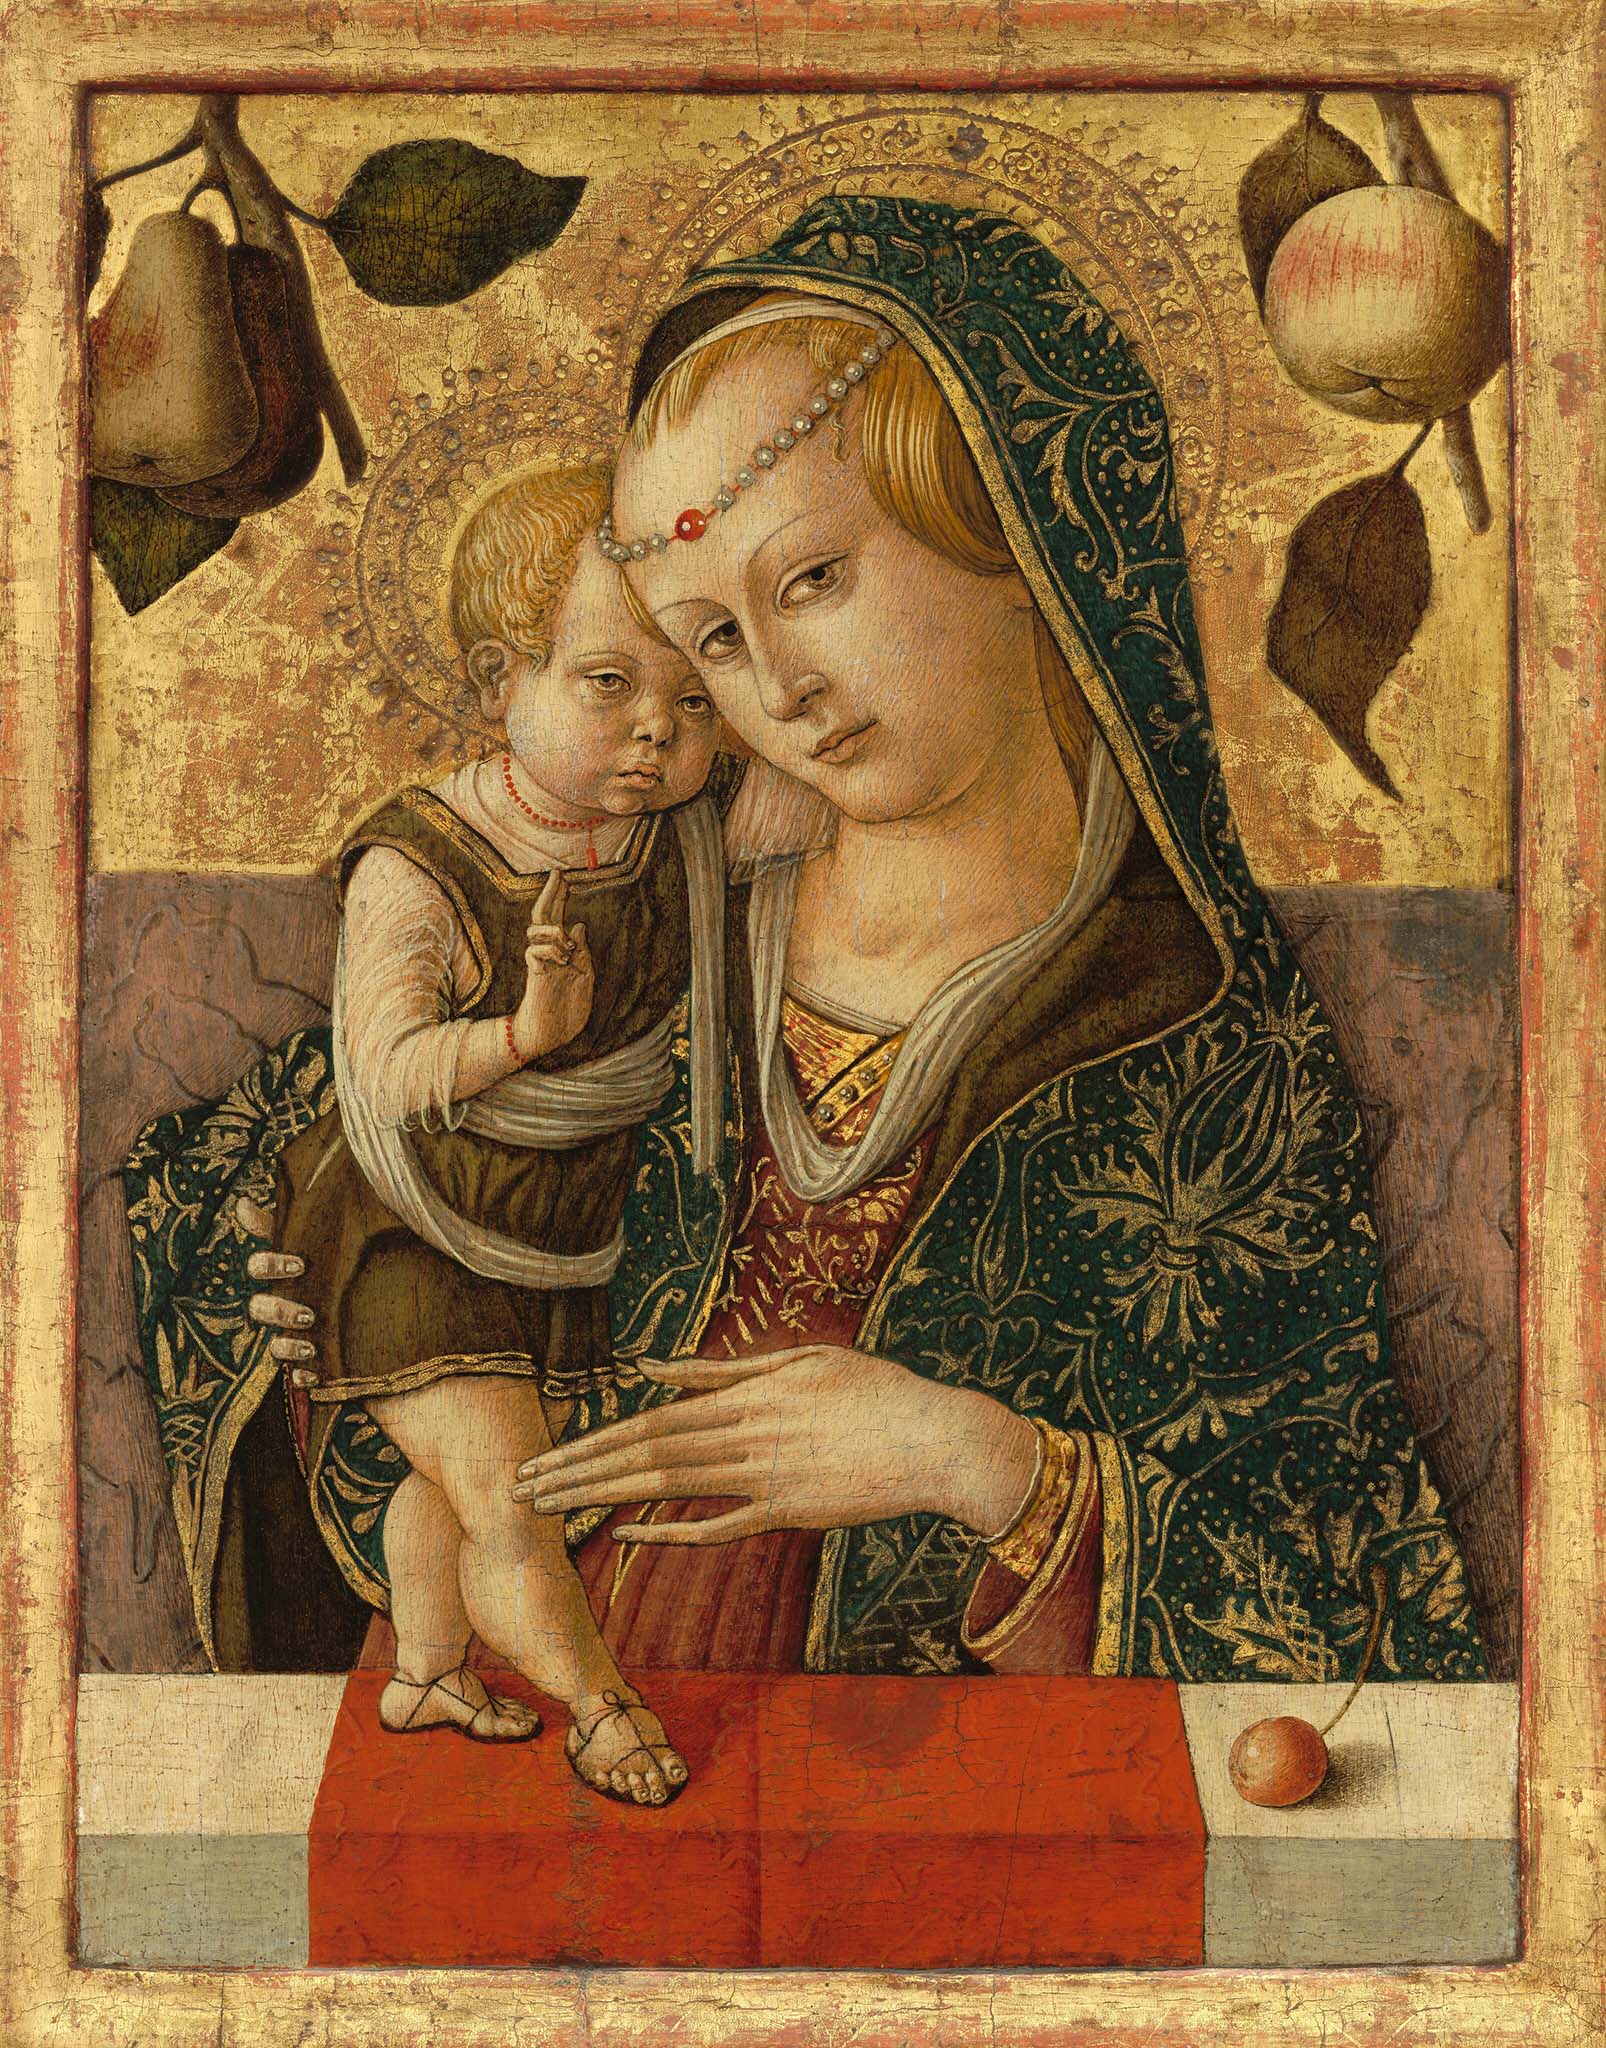 The original Madonna and Child by Carlo Crivelli